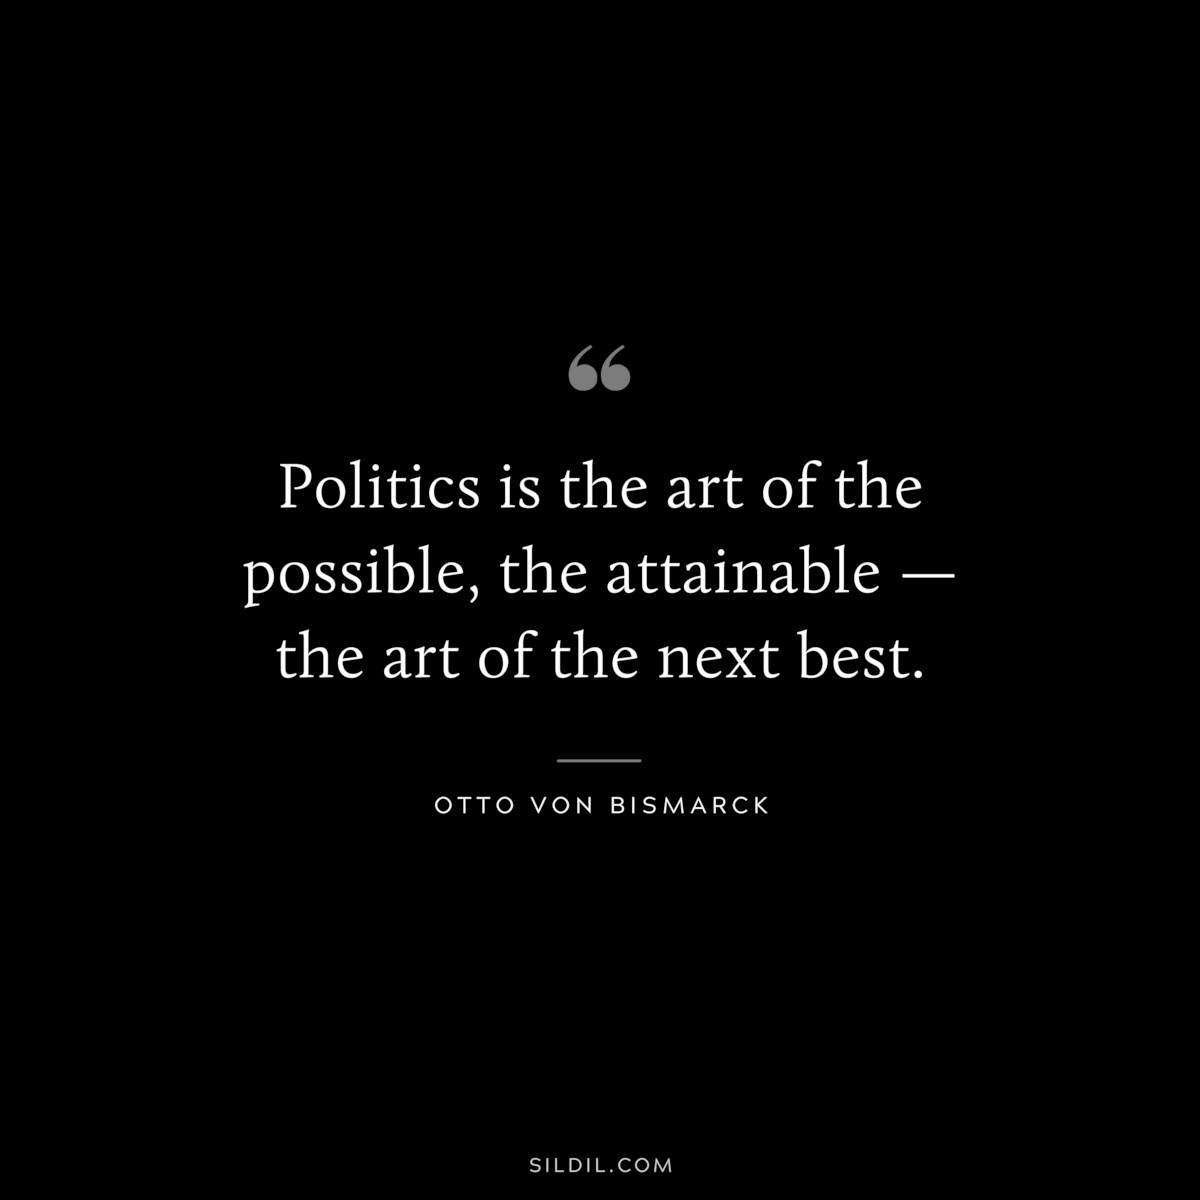 Politics is the art of the possible, the attainable — the art of the next best. ― Otto von Bismarck